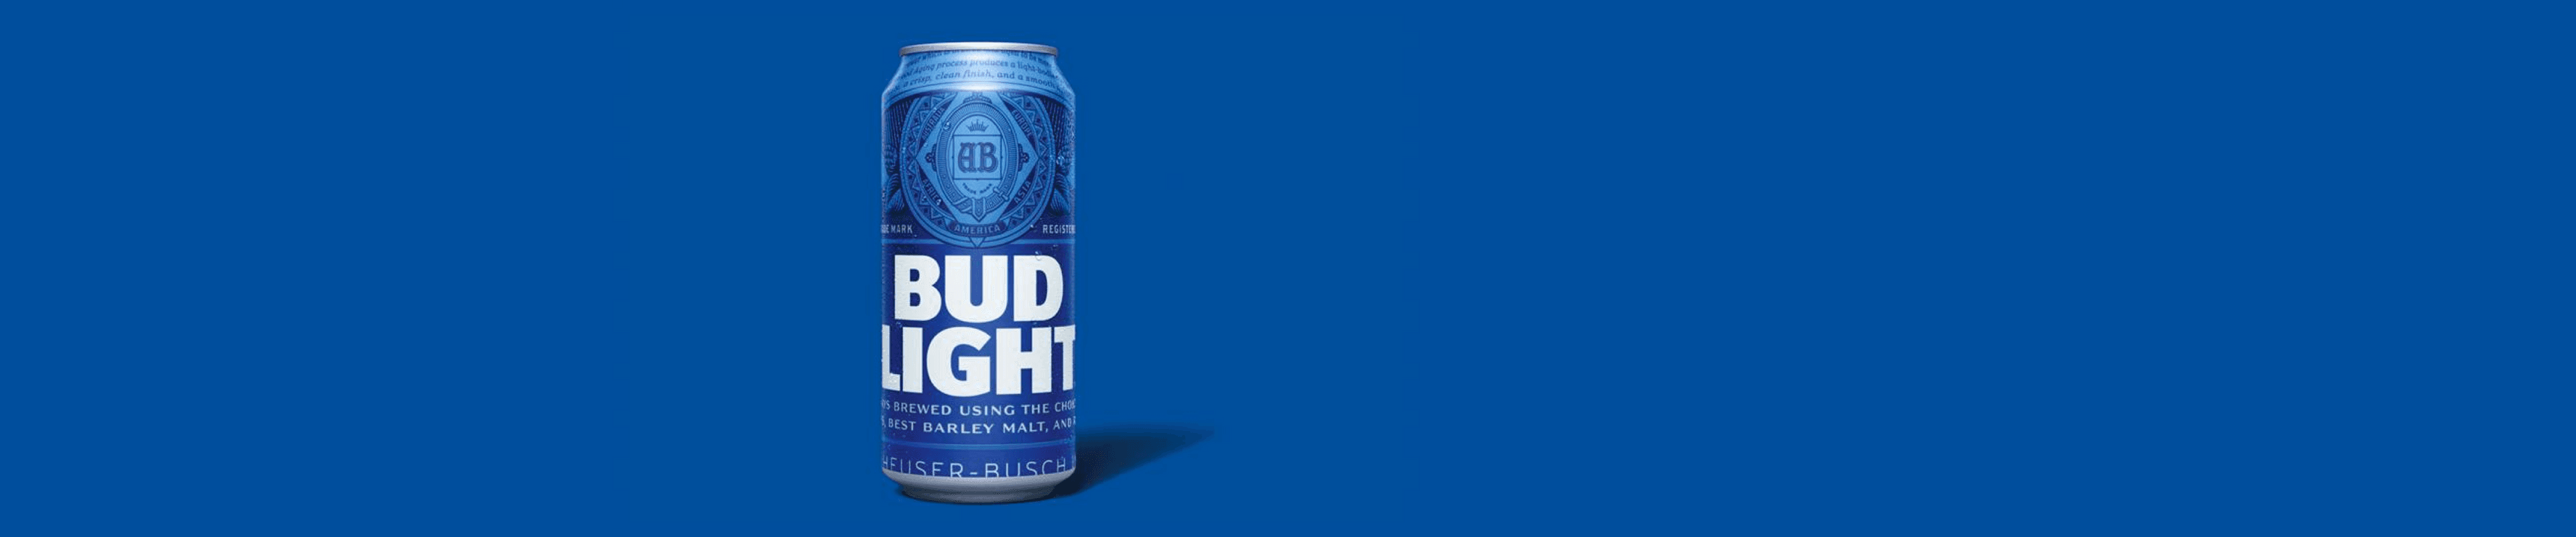 Since 1982, Bud Light has grown to become the best-selling beer in the United States and the No. 1 light beer in the world. Golden in color with delicate aromas of malt and hops. Subtly fruity and citrus taste notes with a fast, clean finish. Buy Bud Light online now from nearby liquor stores via Minibar Delivery. 